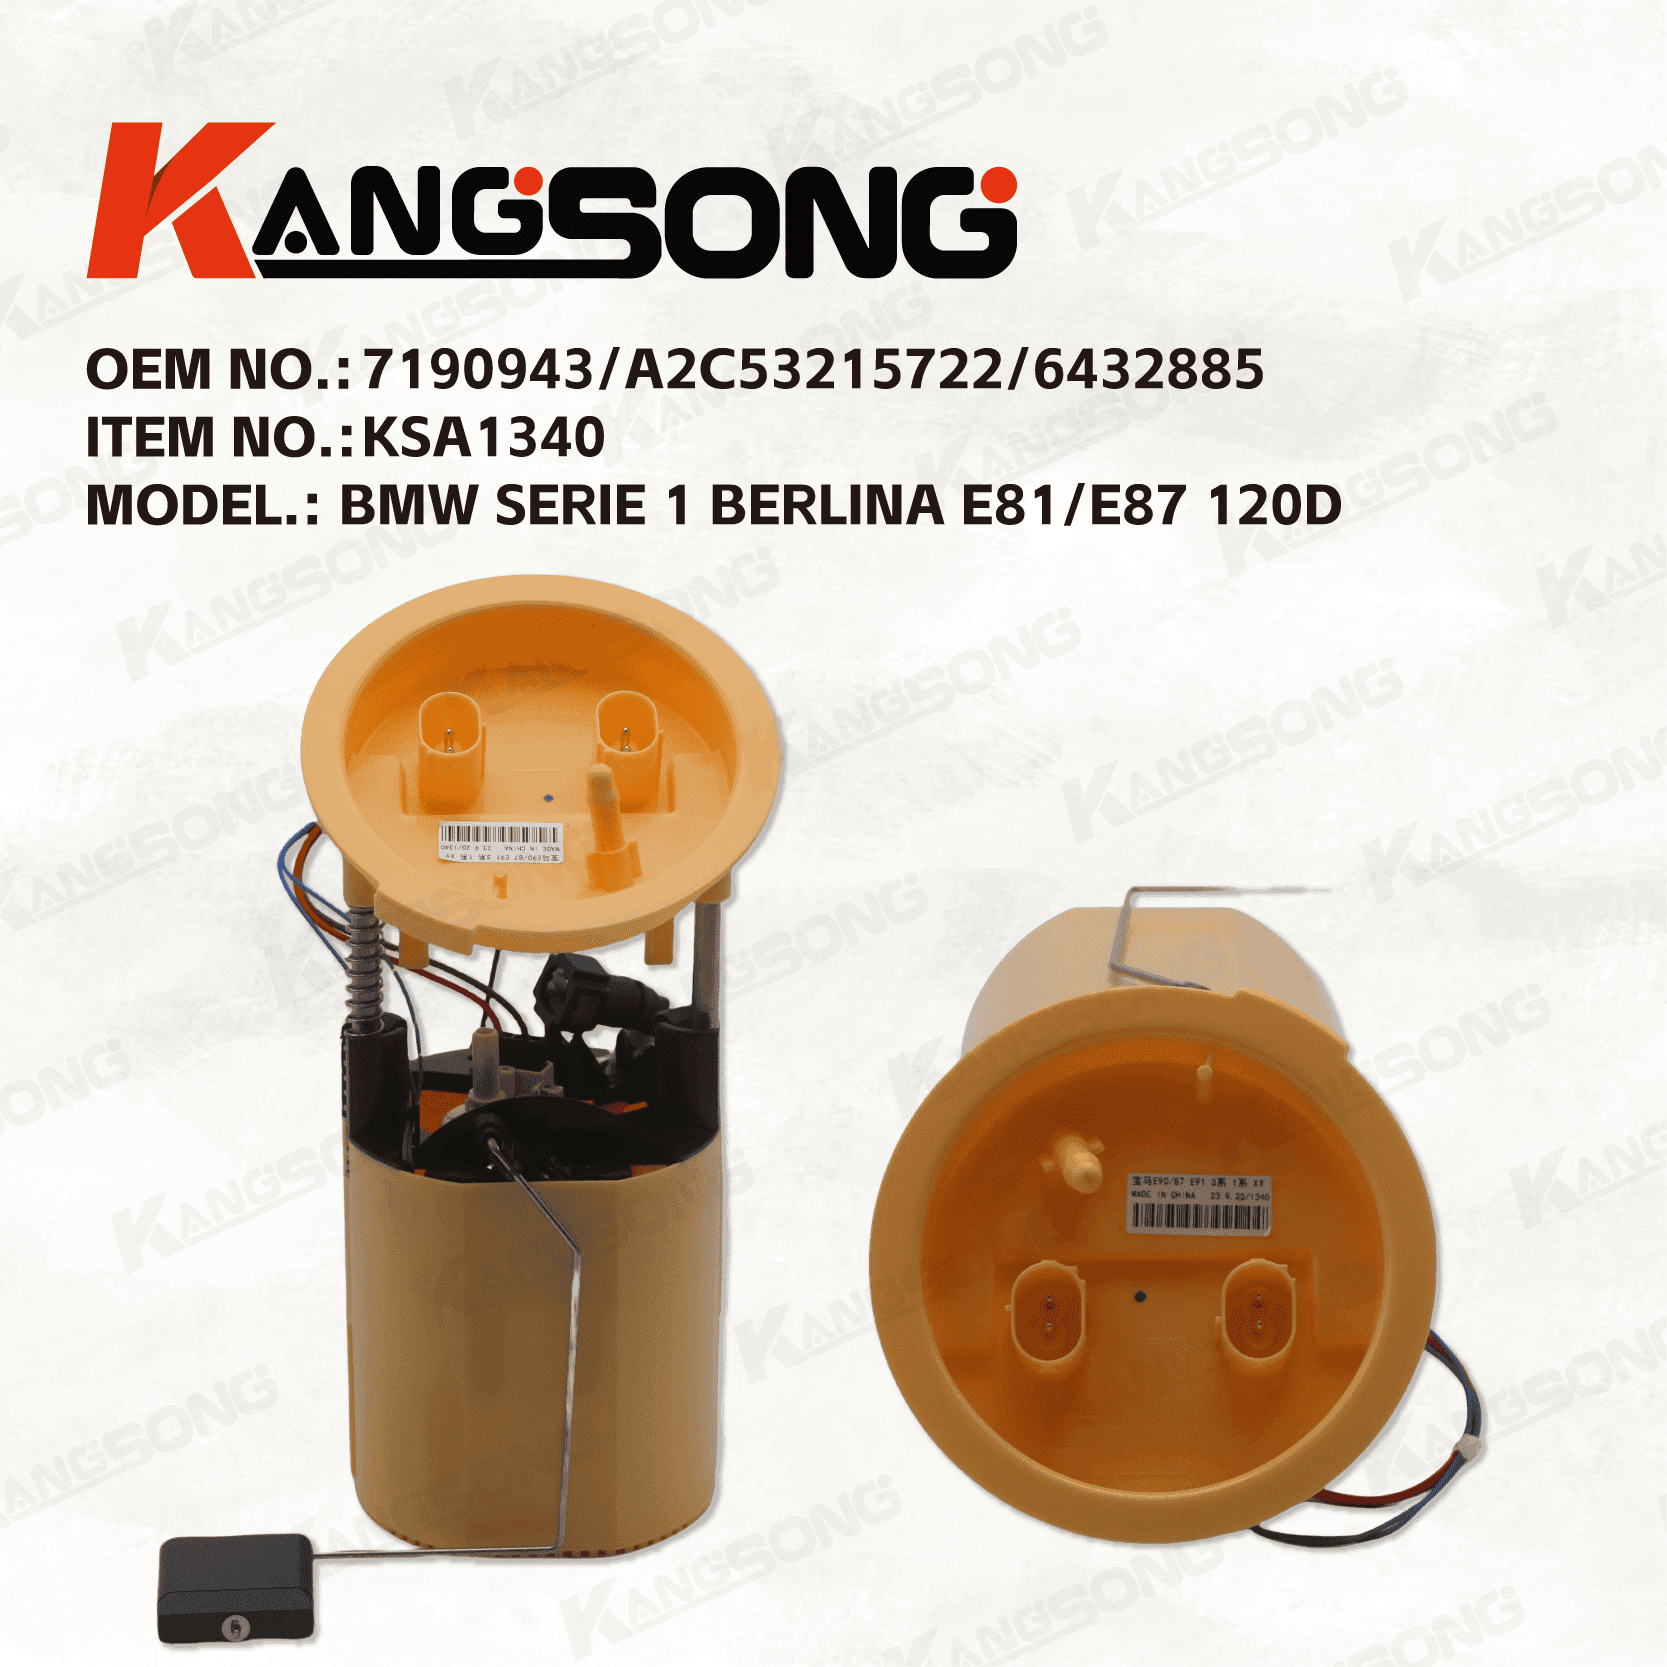 Applicable to  BMW SERIE 1/ 7190943  A2C53215722 6432885/ Fuel Pump Assembly/KS-A1340